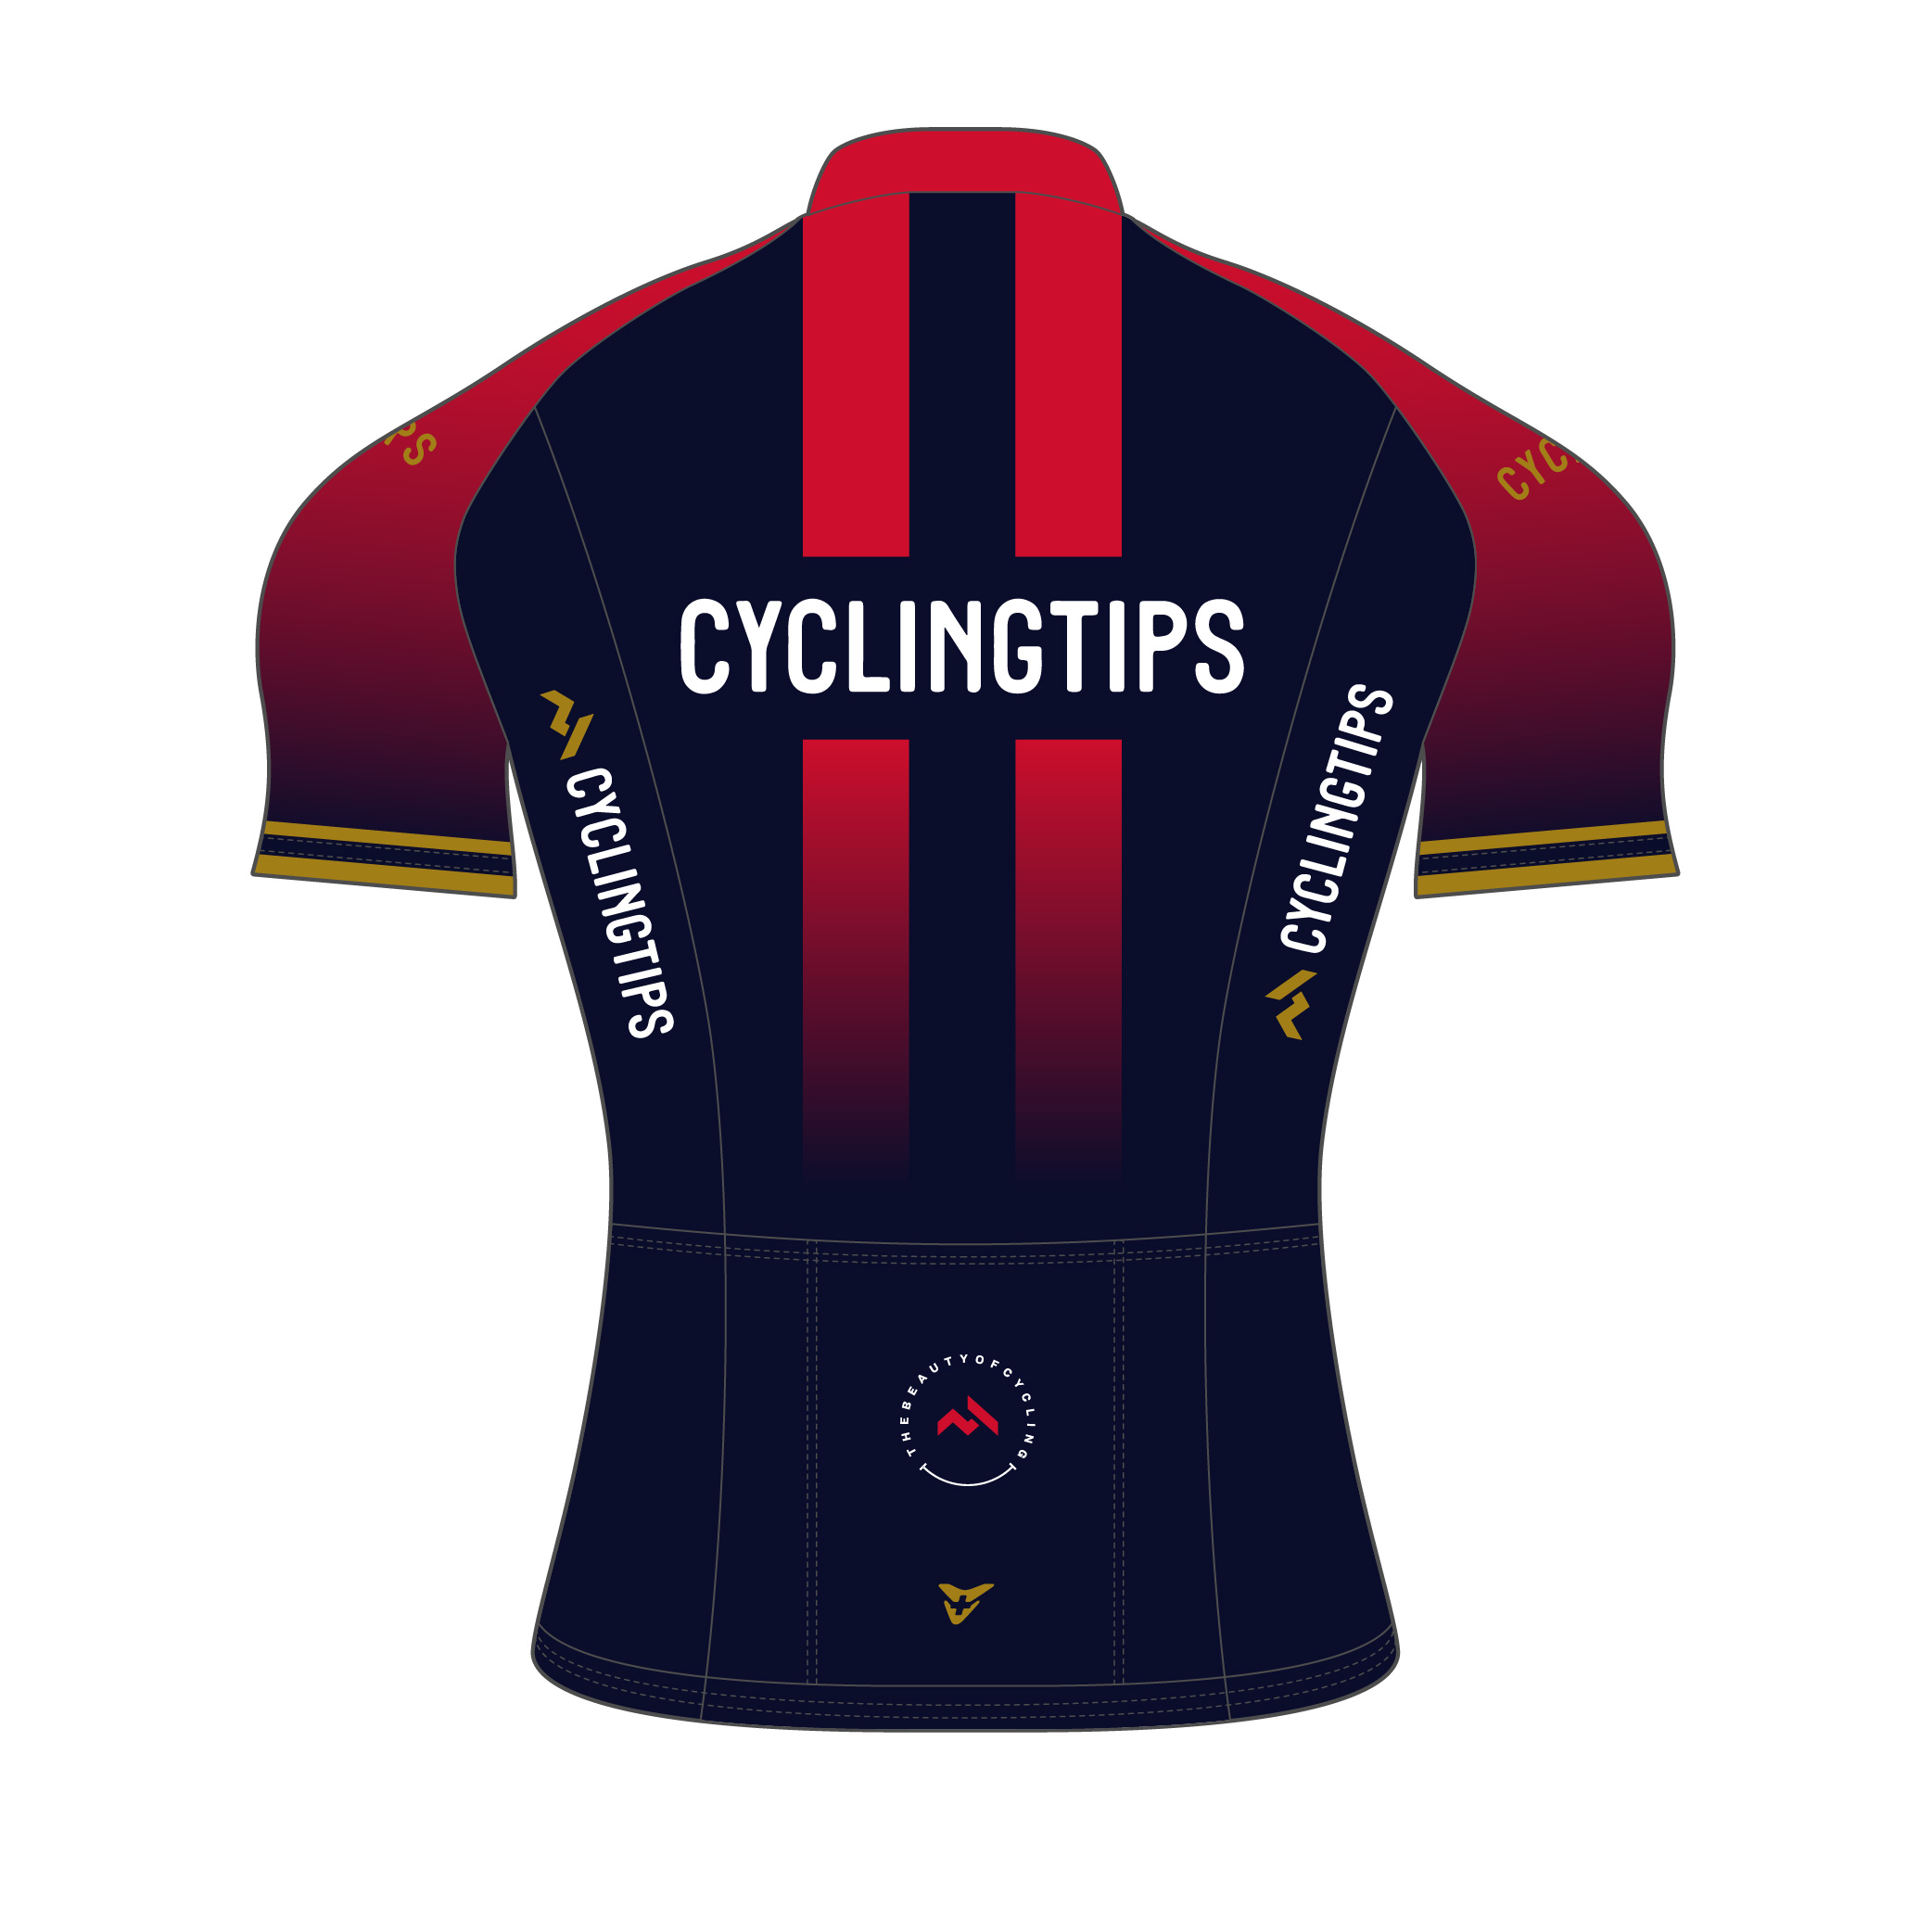 cycling-tips-22-s-51-0010-red-blue-top-back-2.jpg